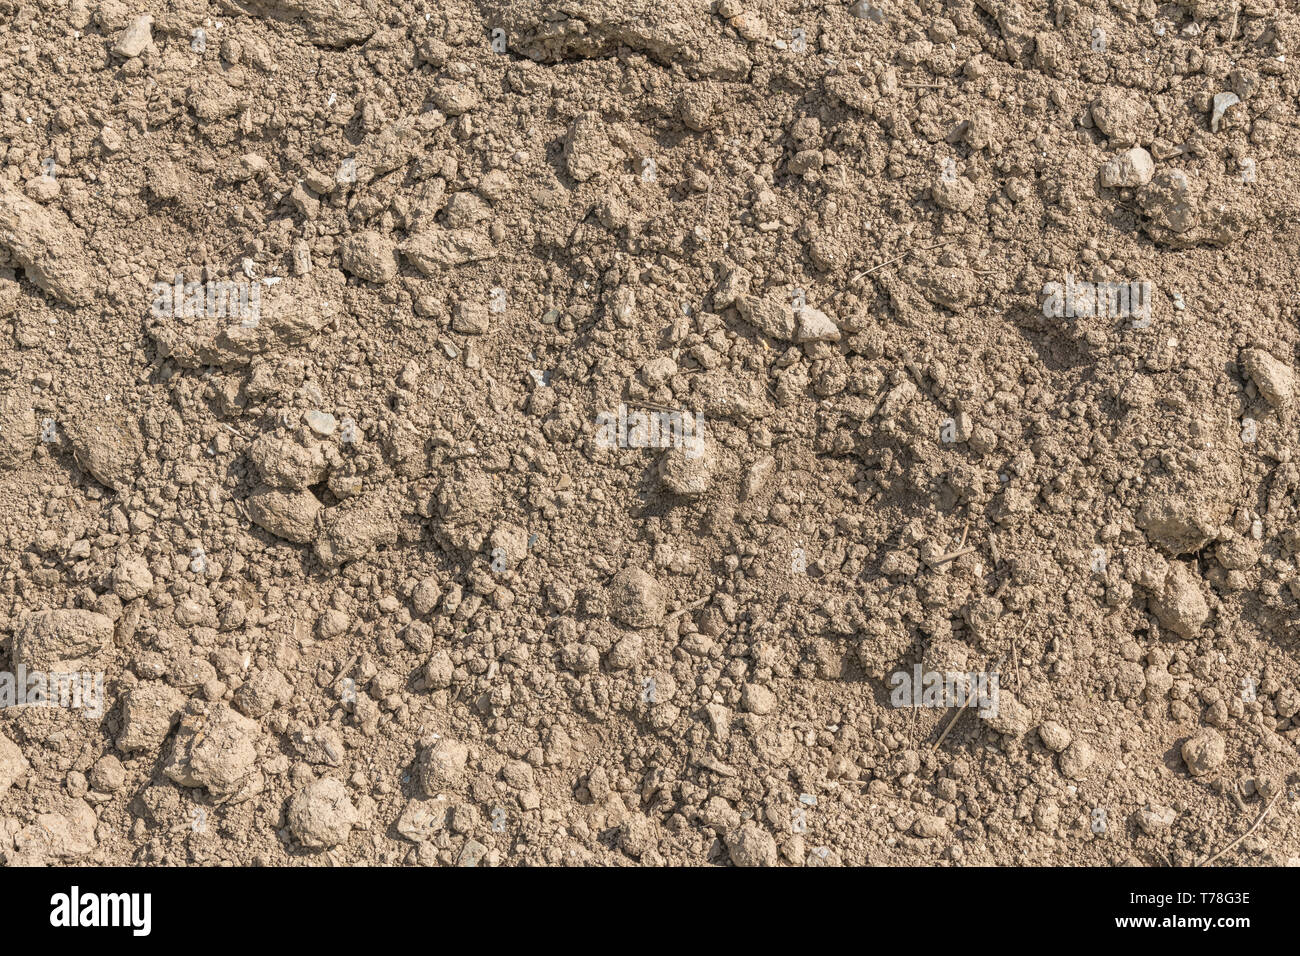 Lumps of dry soil in tilled / ploughed field. For scorched earth, World Water Day, drought, bone-dry, parched soil, drought, ploughed soil structure Stock Photo